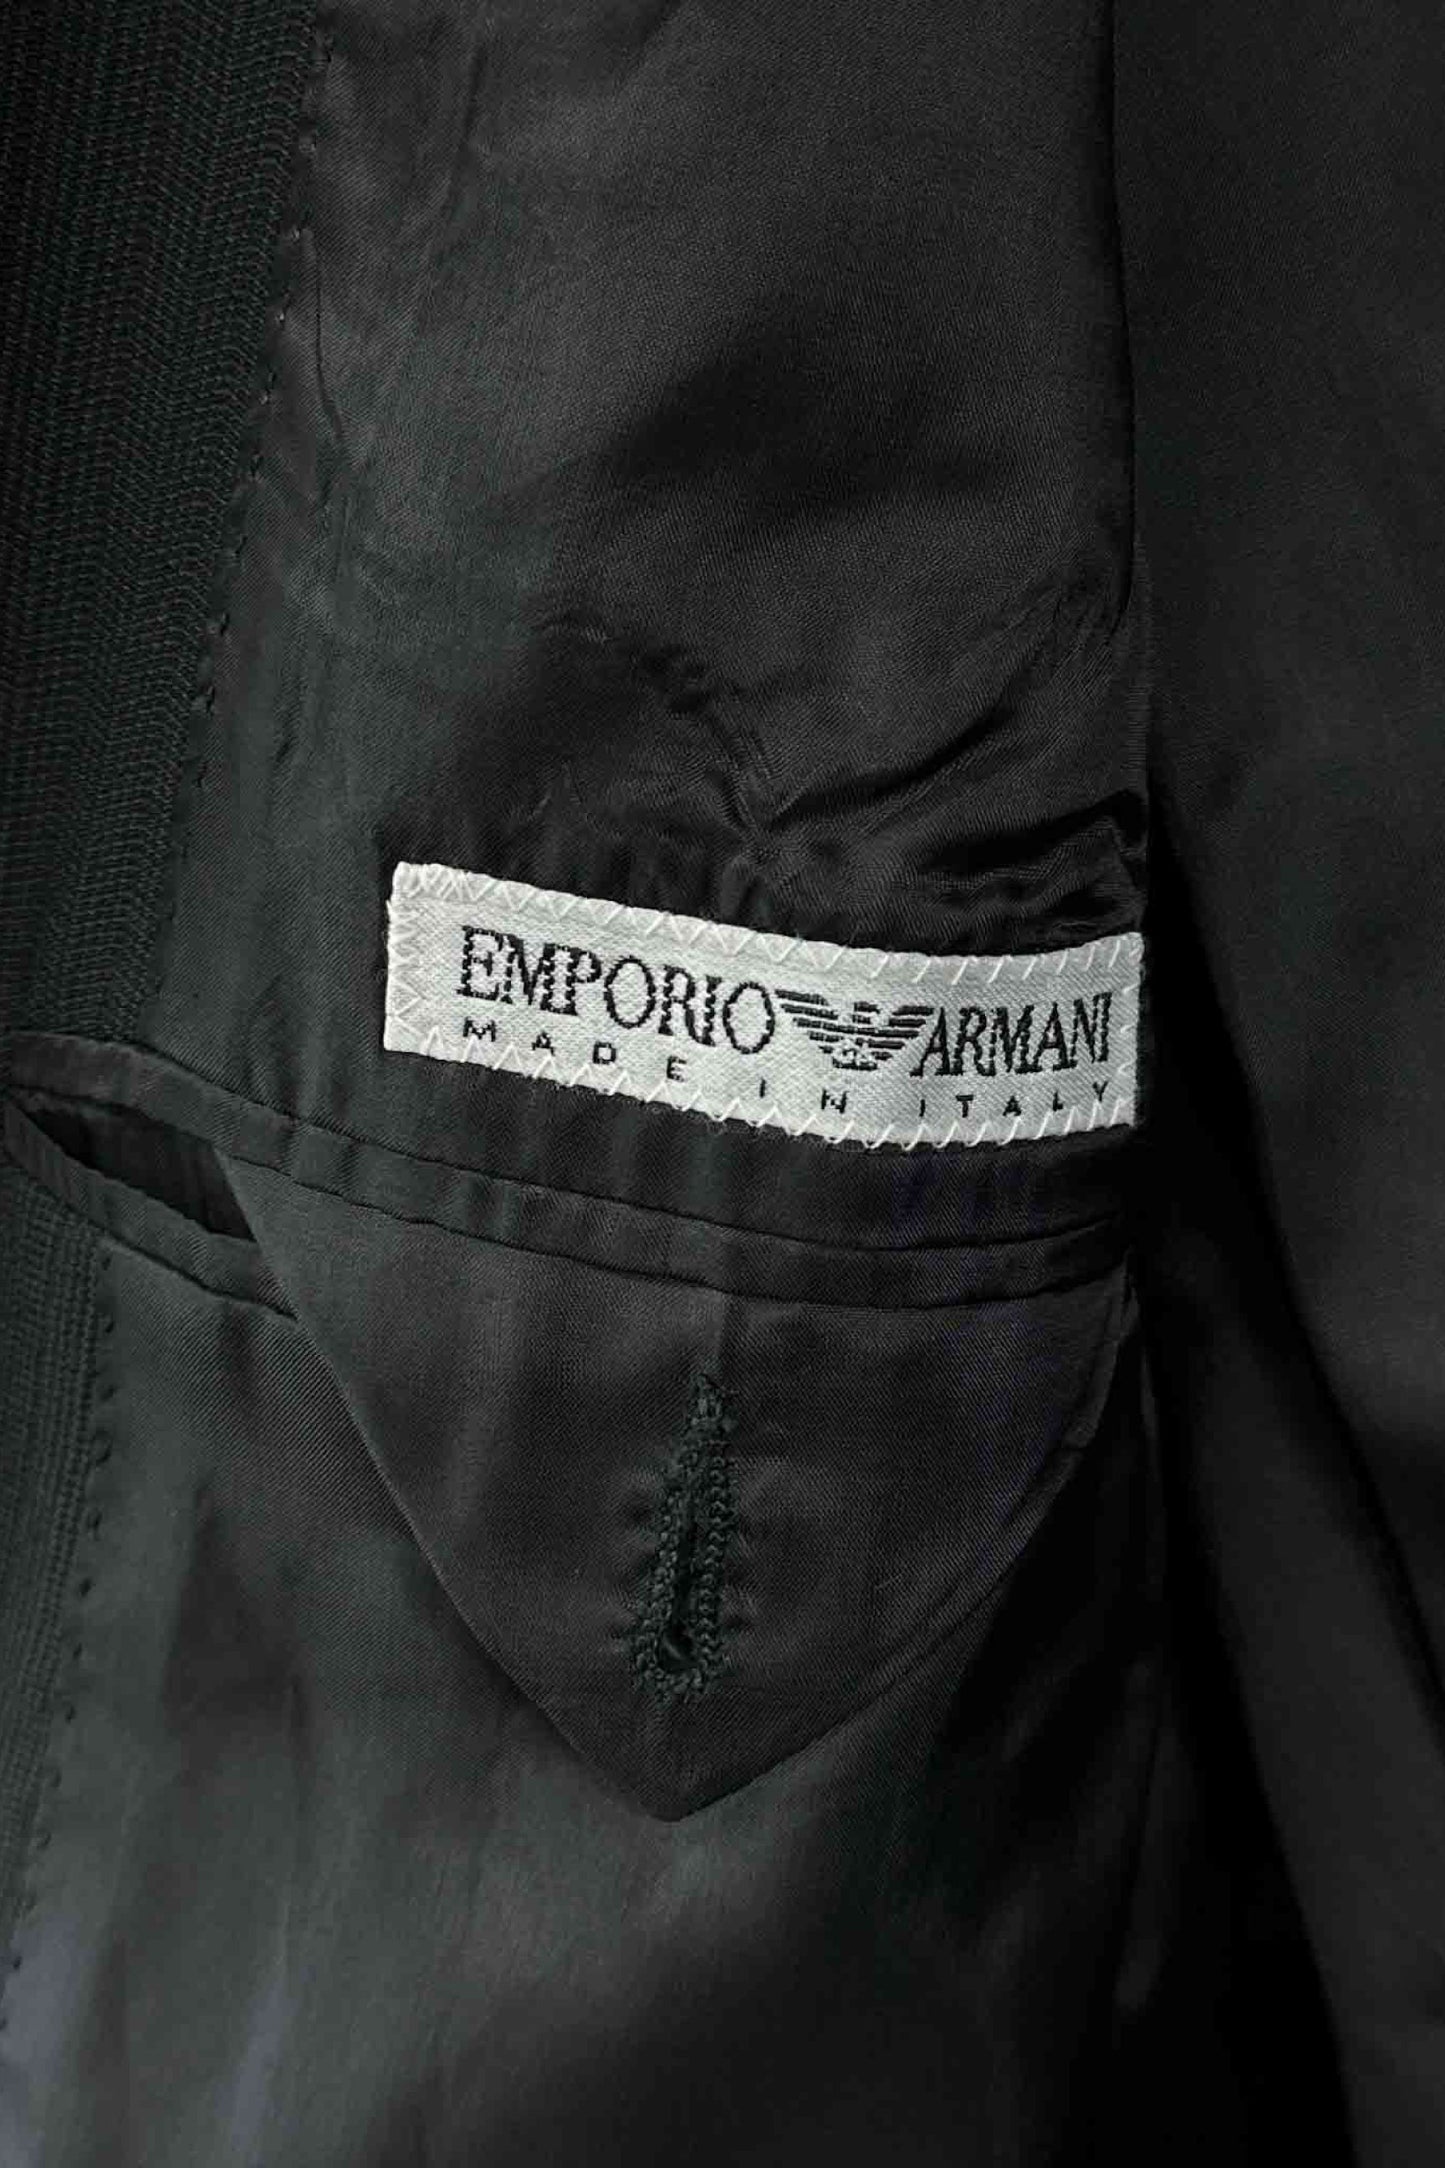 Made in ITALY EMPORIO ARMANI set up